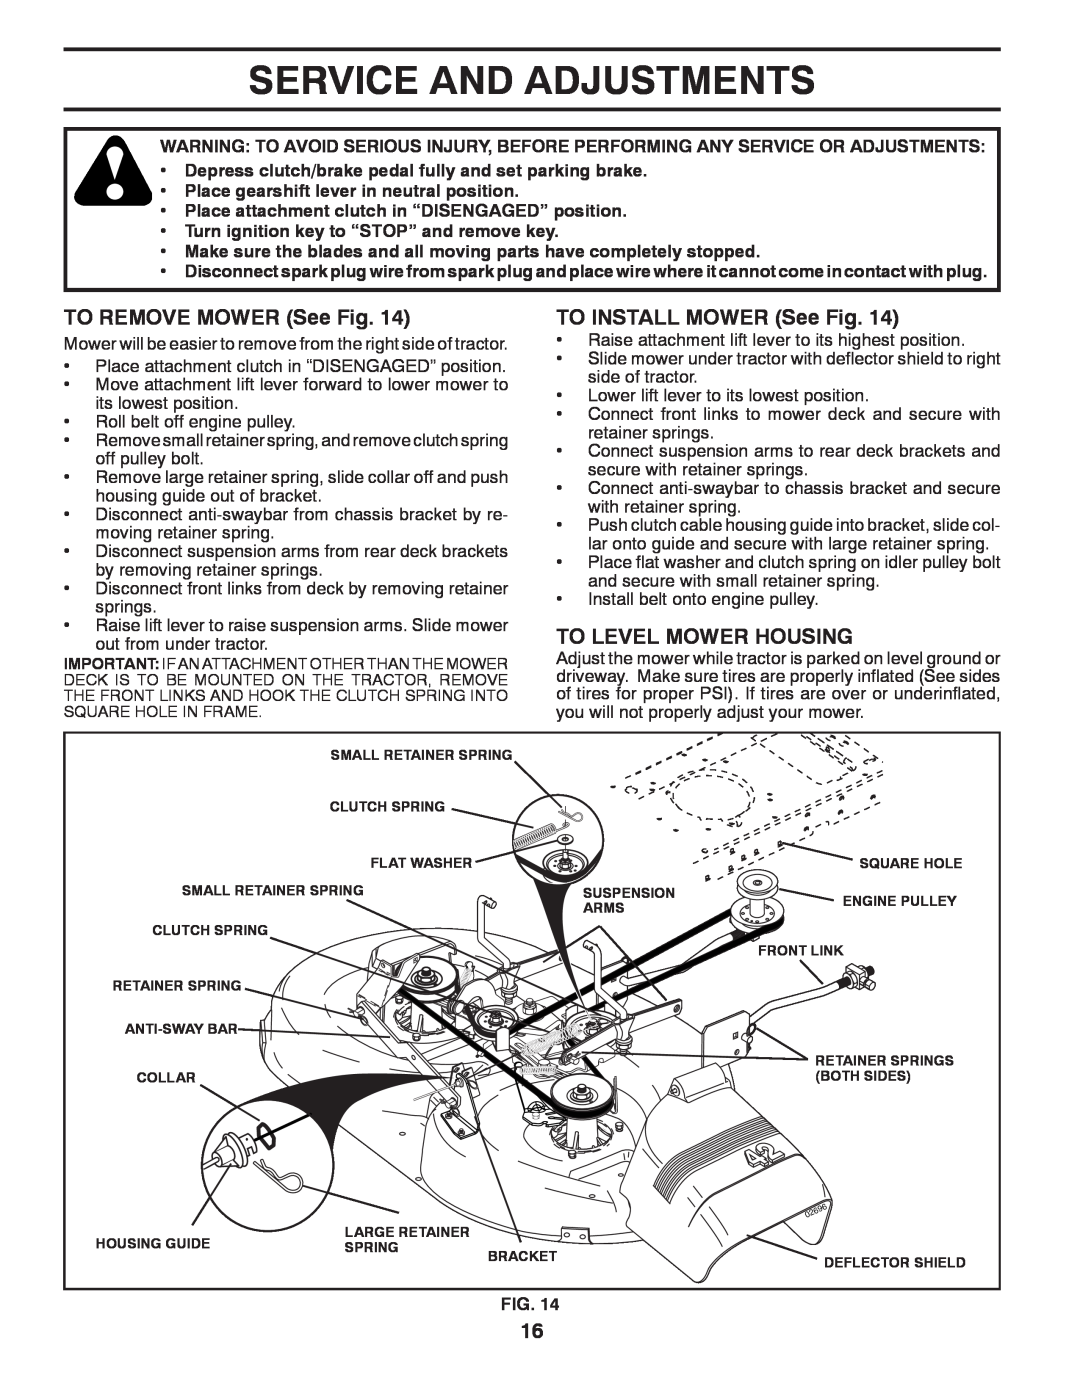 Poulan 424008 manual Service And Adjustments, TO REMOVE MOWER See Fig, TO INSTALL MOWER See Fig, To Level Mower Housing 